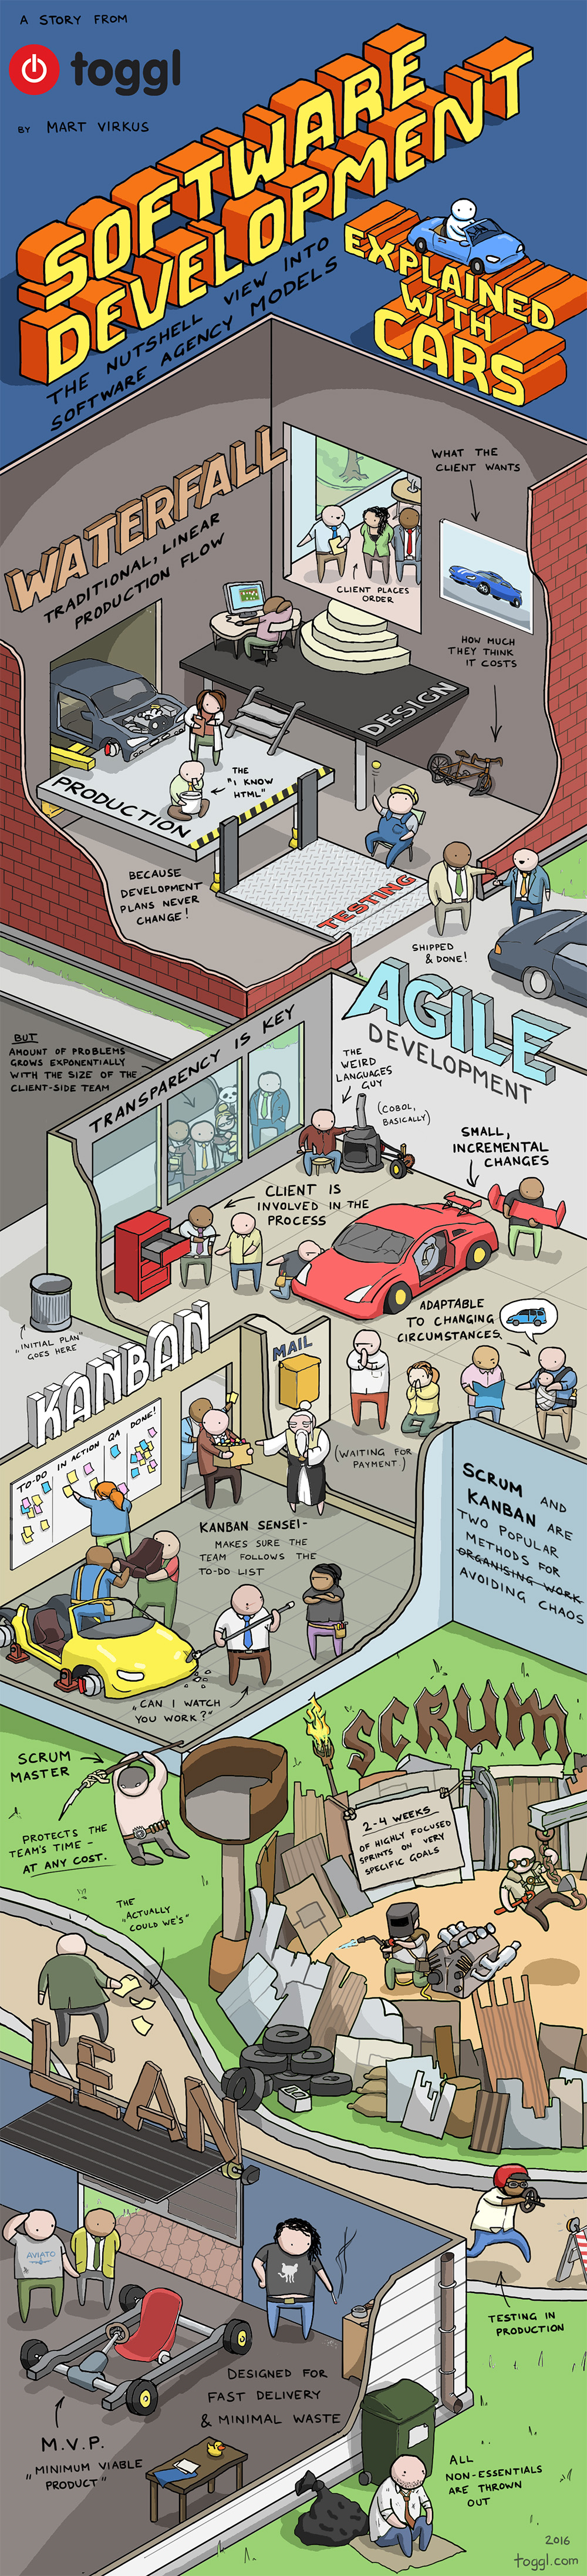 software-development-methods-explained-with-cars-toggl-infographic-02